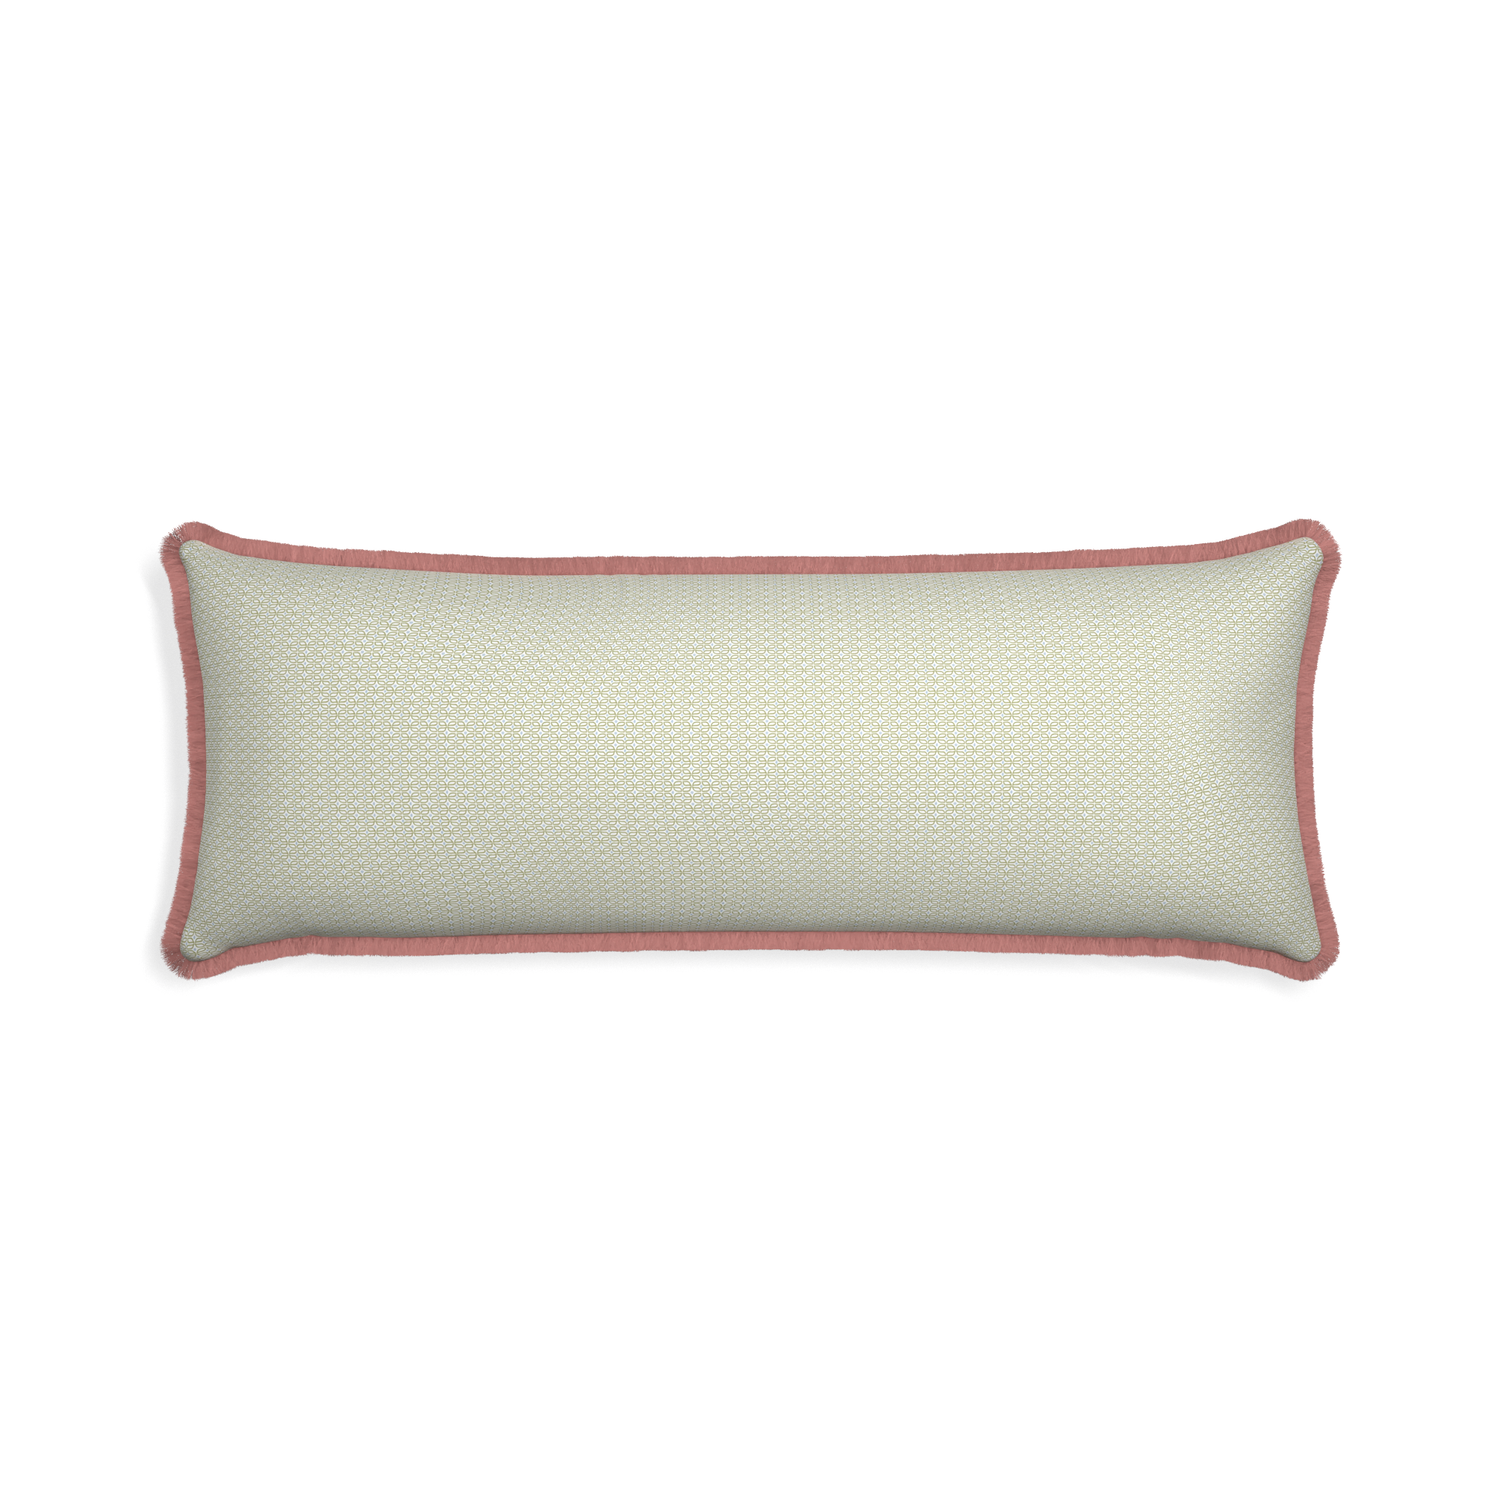 Xl-lumbar loomi moss custom pillow with d fringe on white background